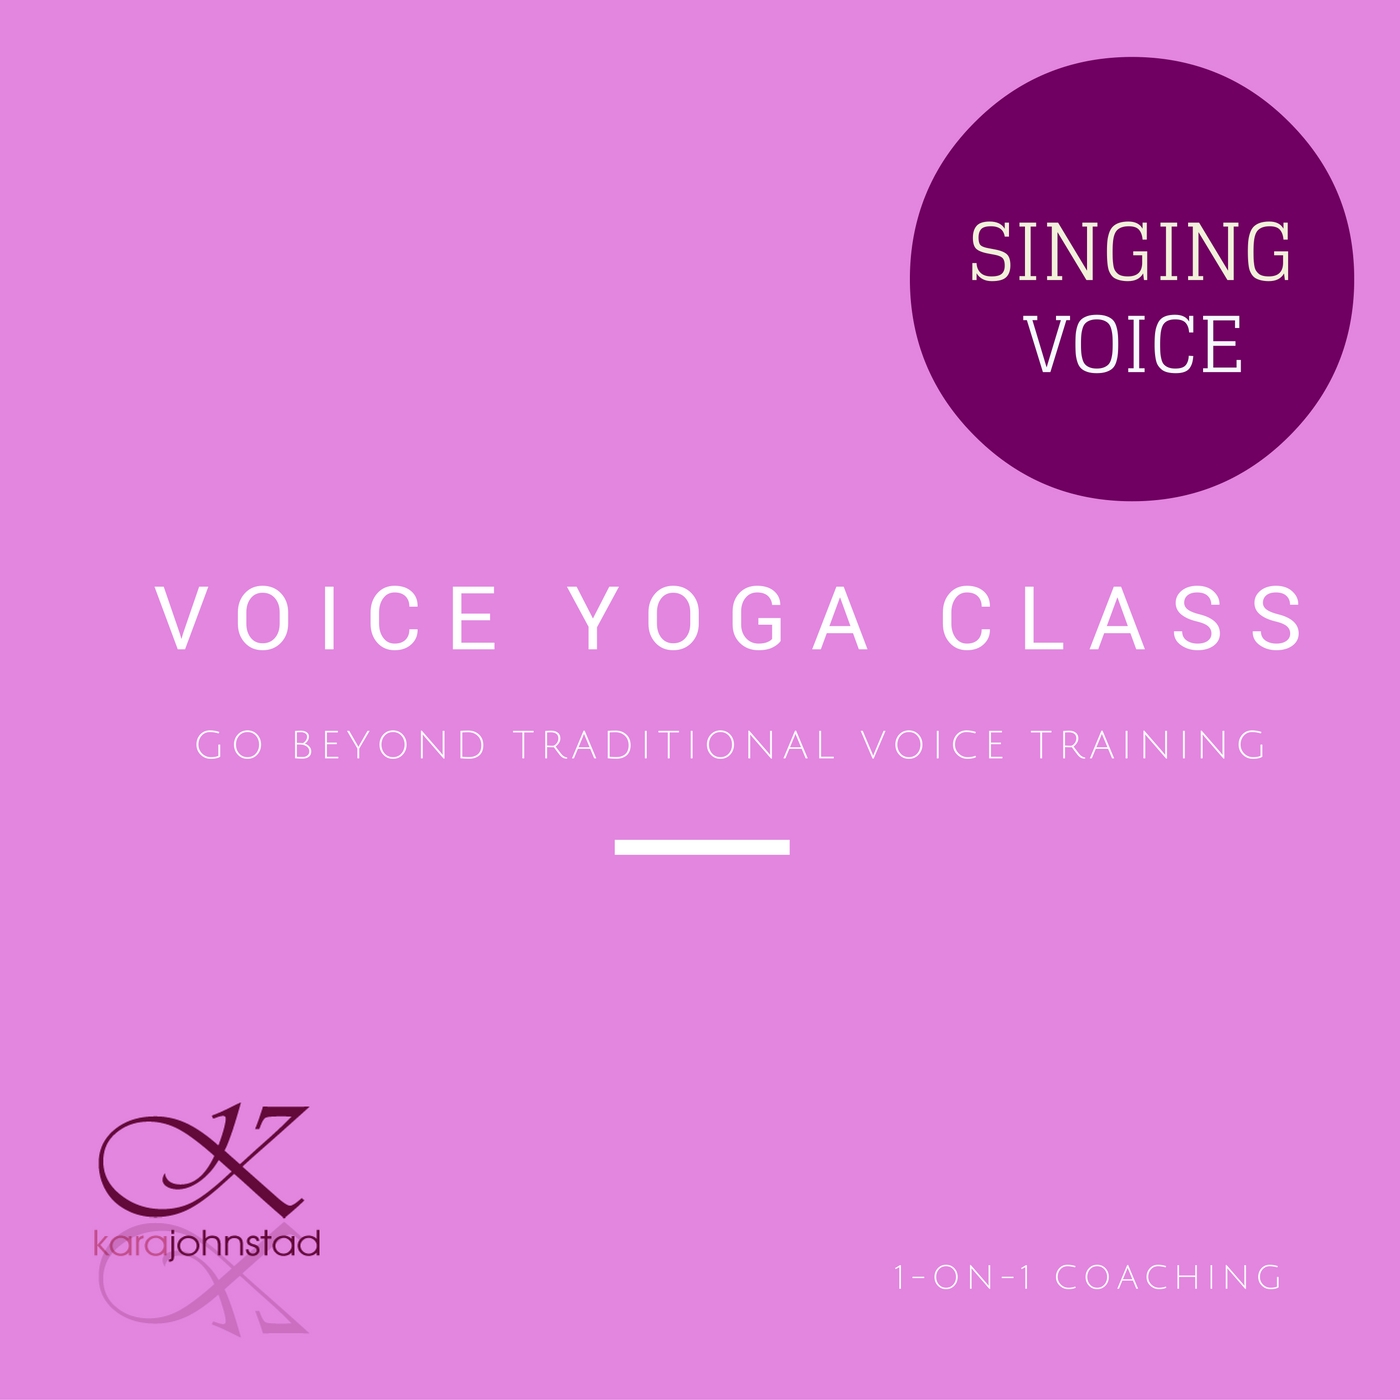 Voice Visionary Kara Johnstad and Voice Your Essence Training Sessions.